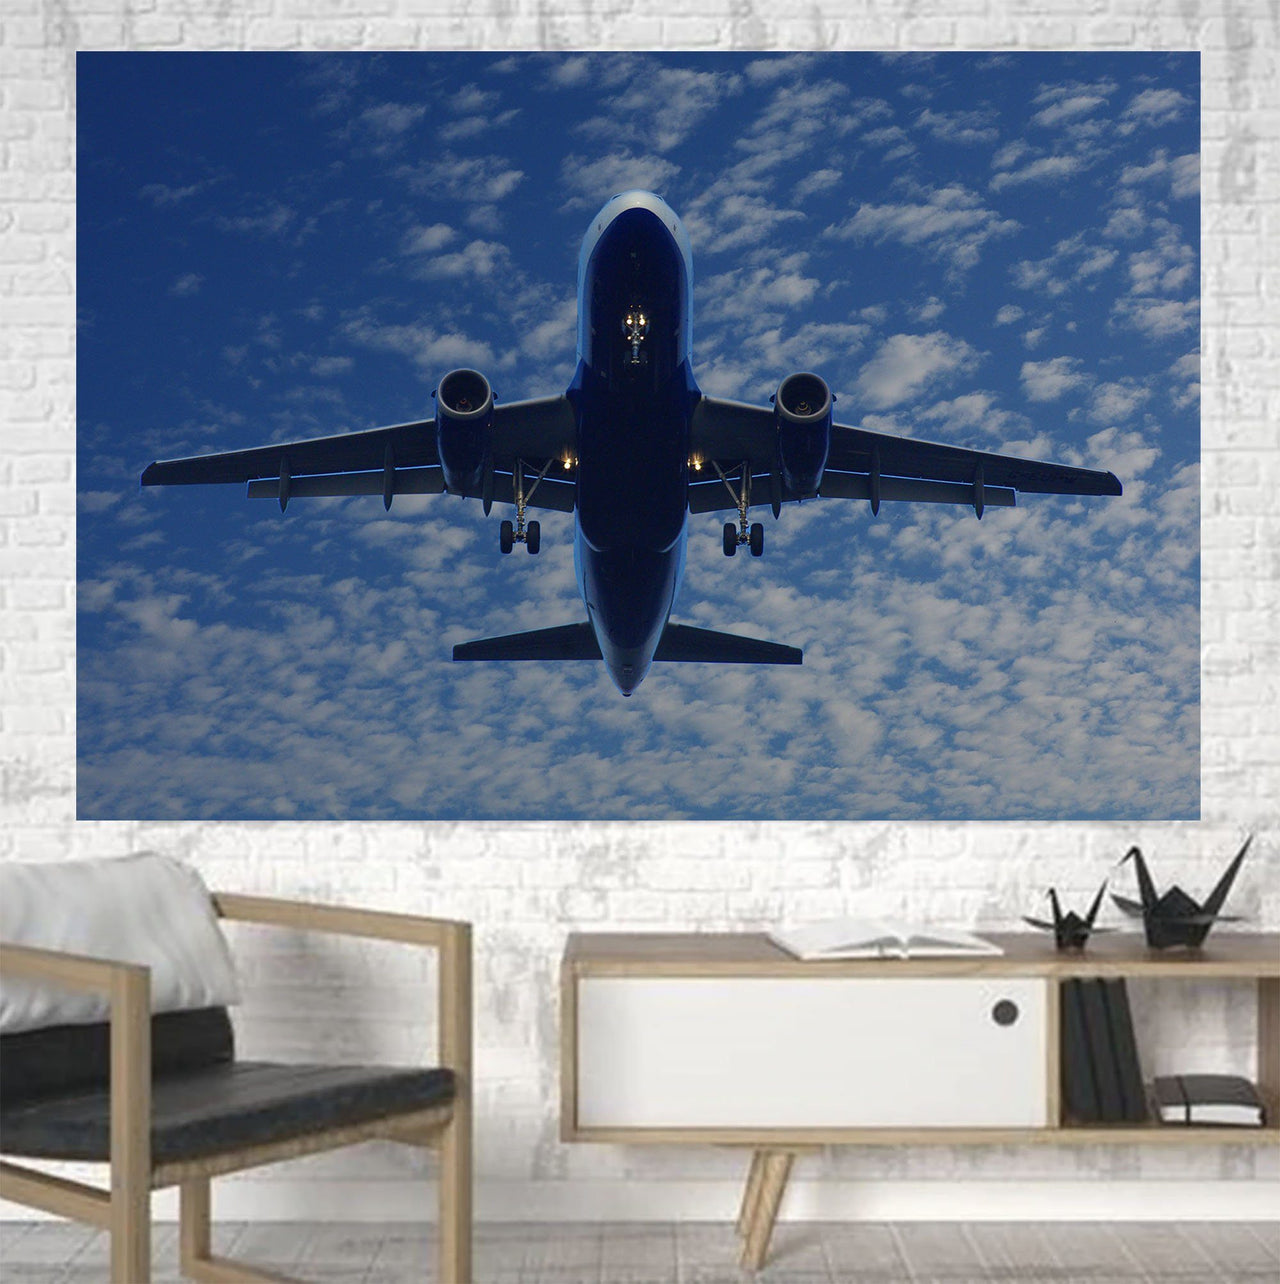 Airplane From Below Printed Canvas Posters (1 Piece) Aviation Shop 